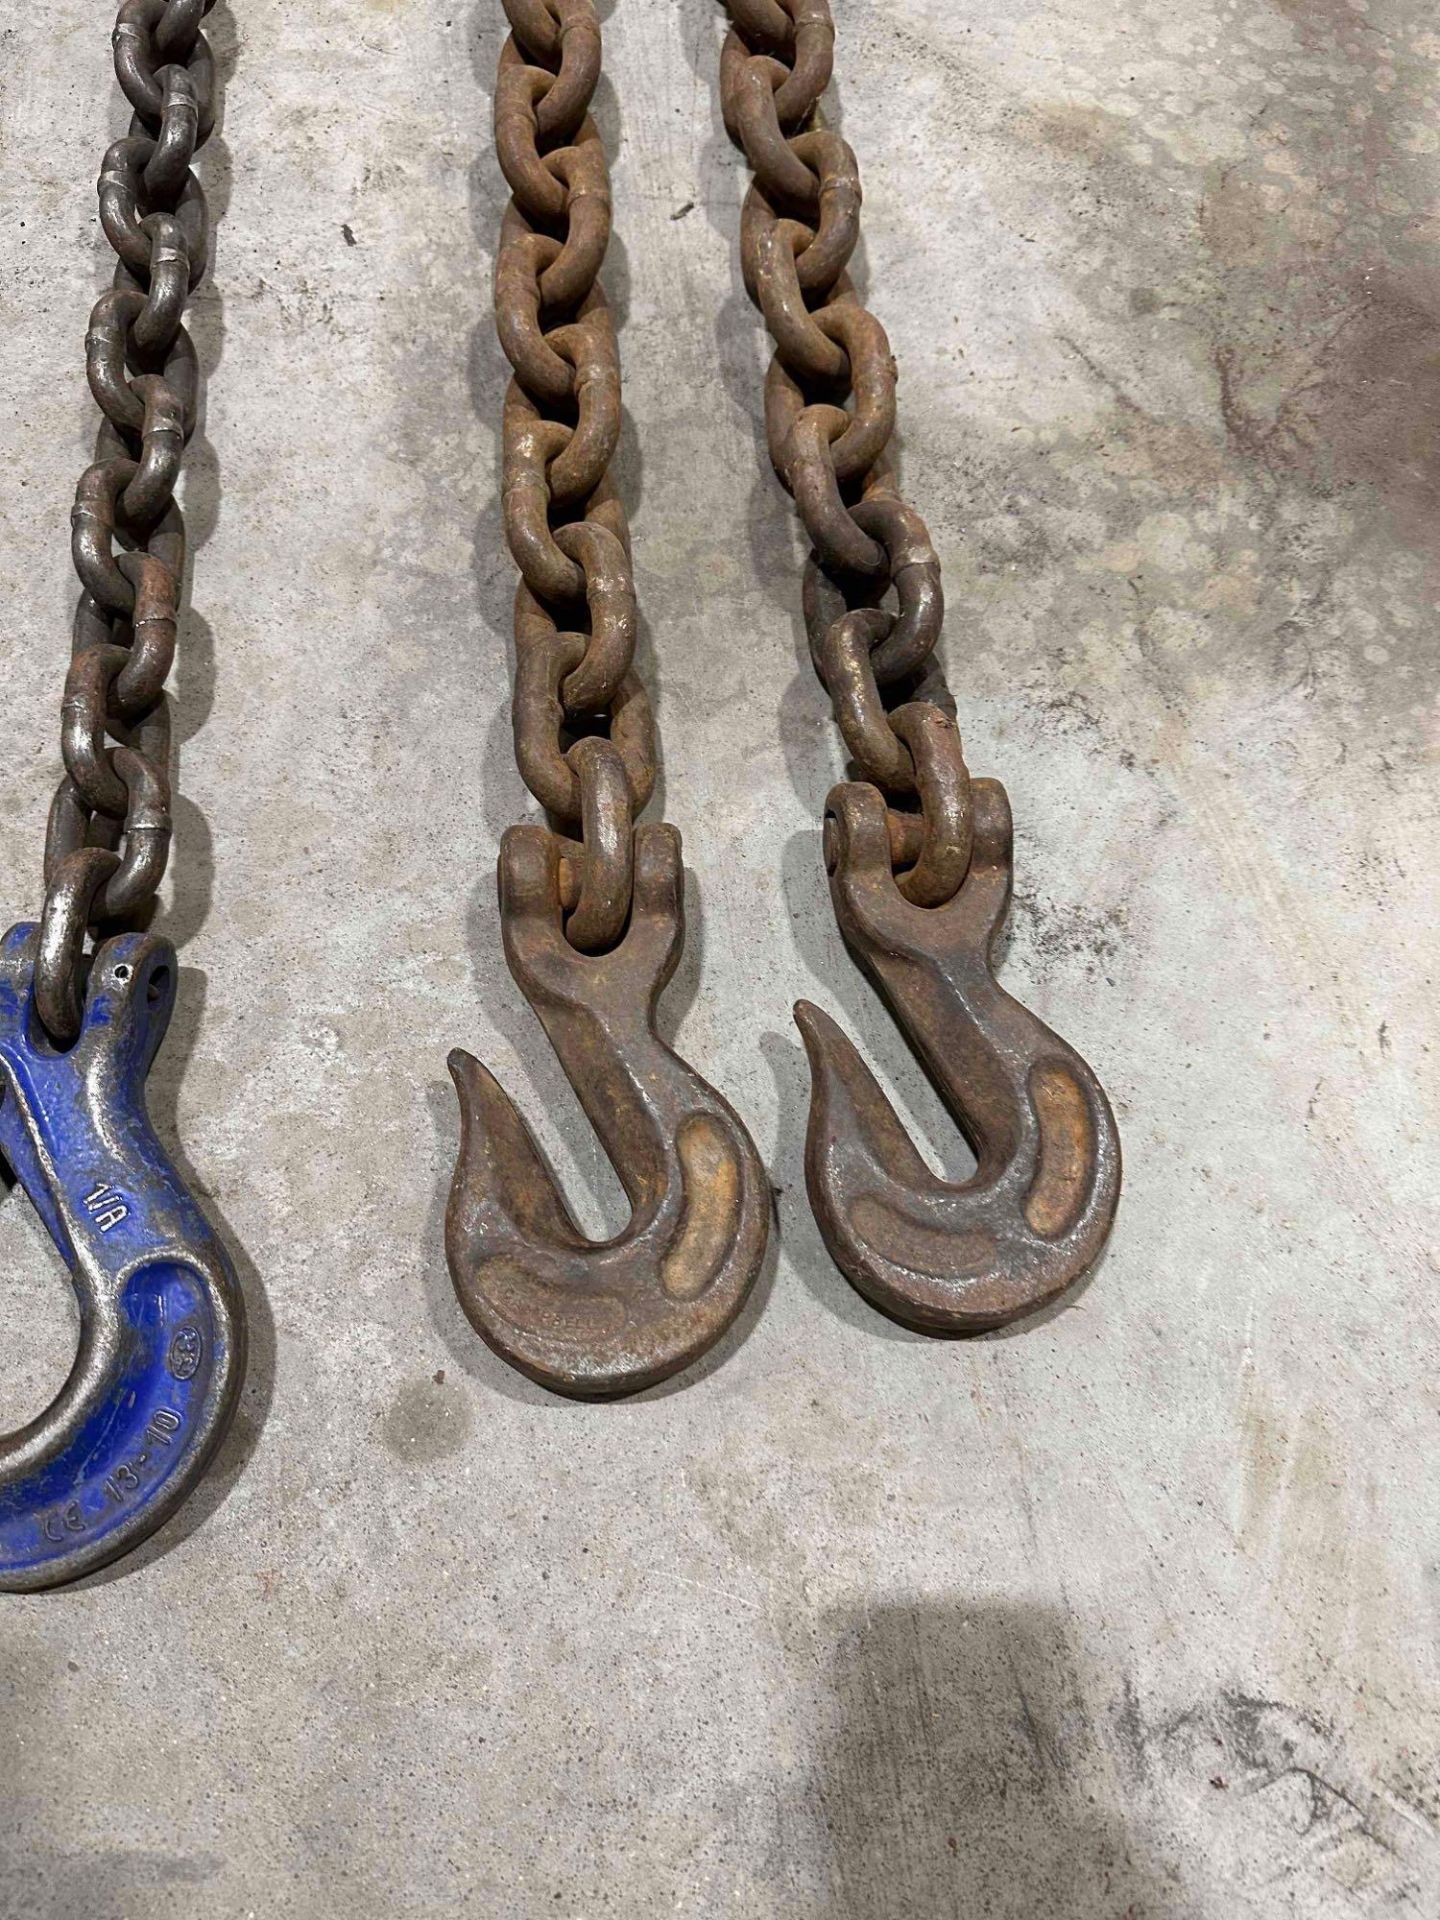 Lot of 2 Chains with Hooks, Assorted Lengths - Image 6 of 6